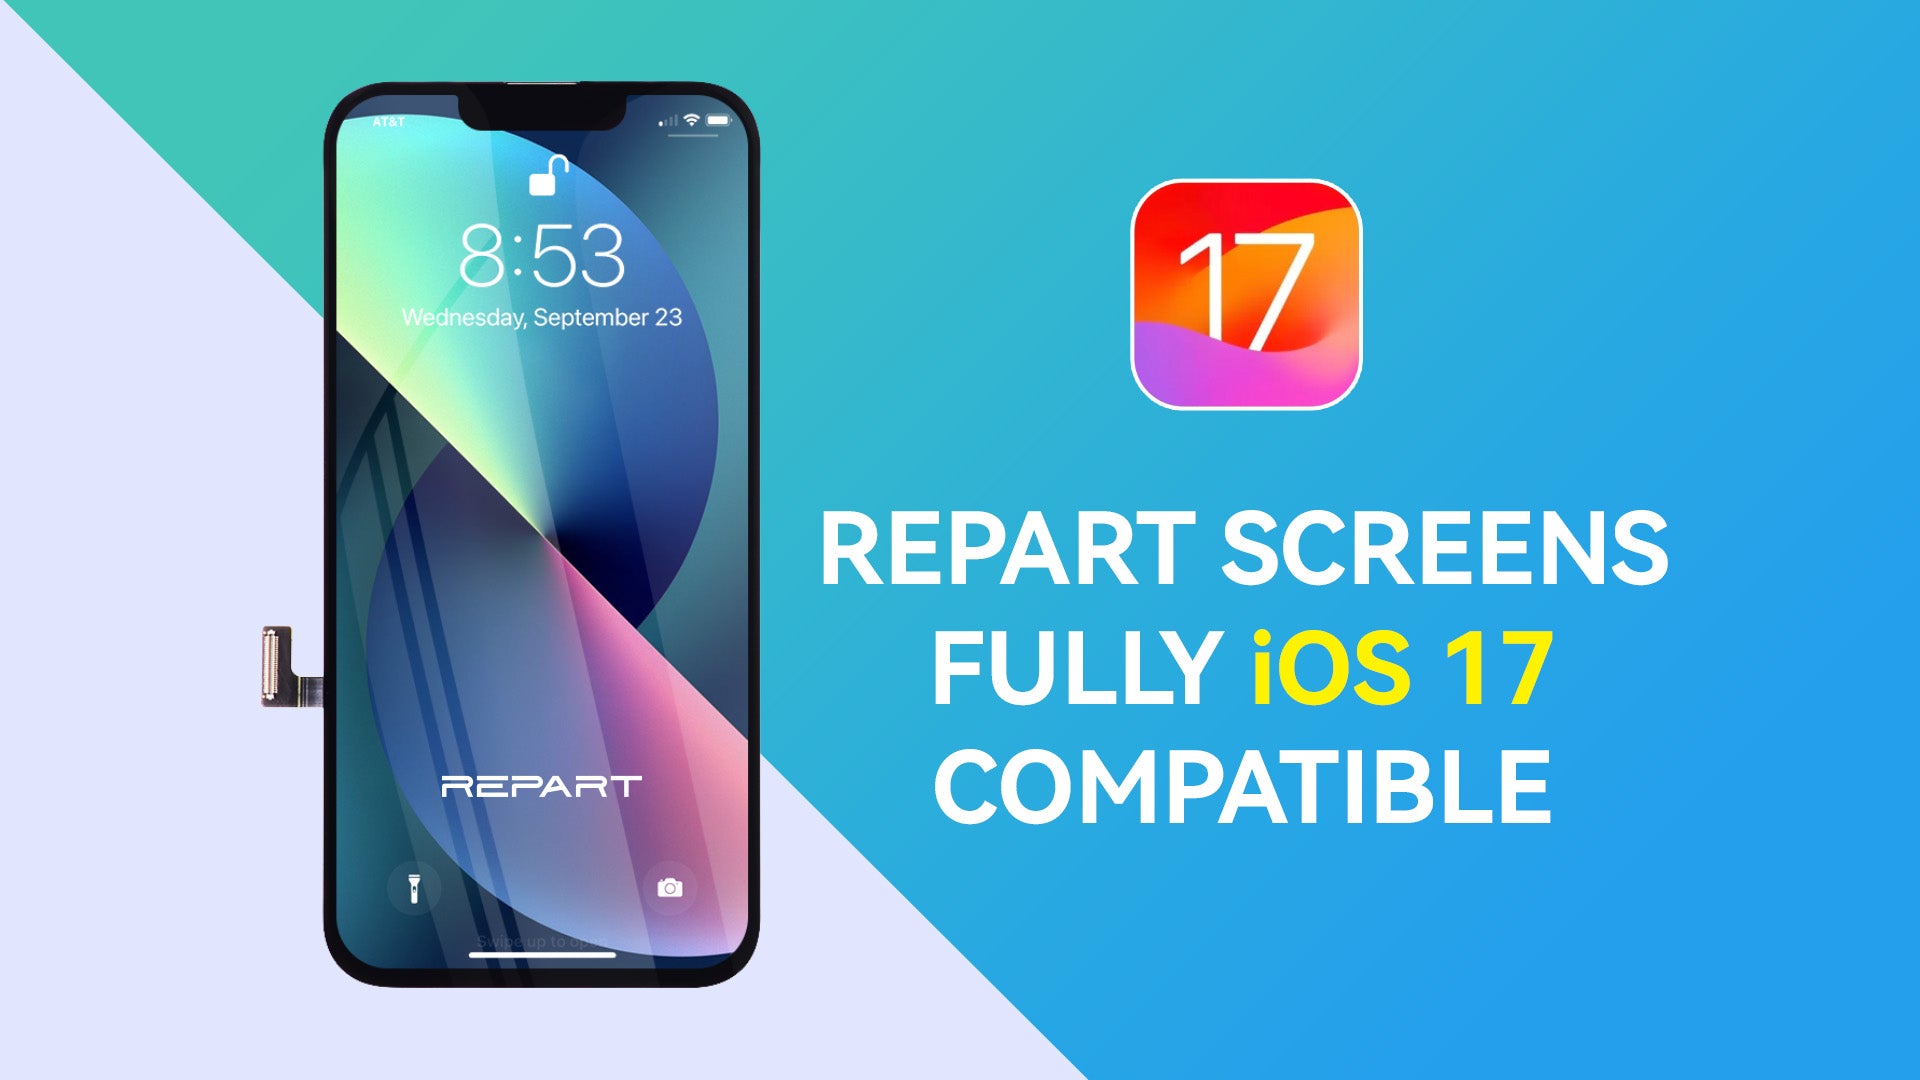 Is REPART's Screen the Perfect Fit for iOS 17?